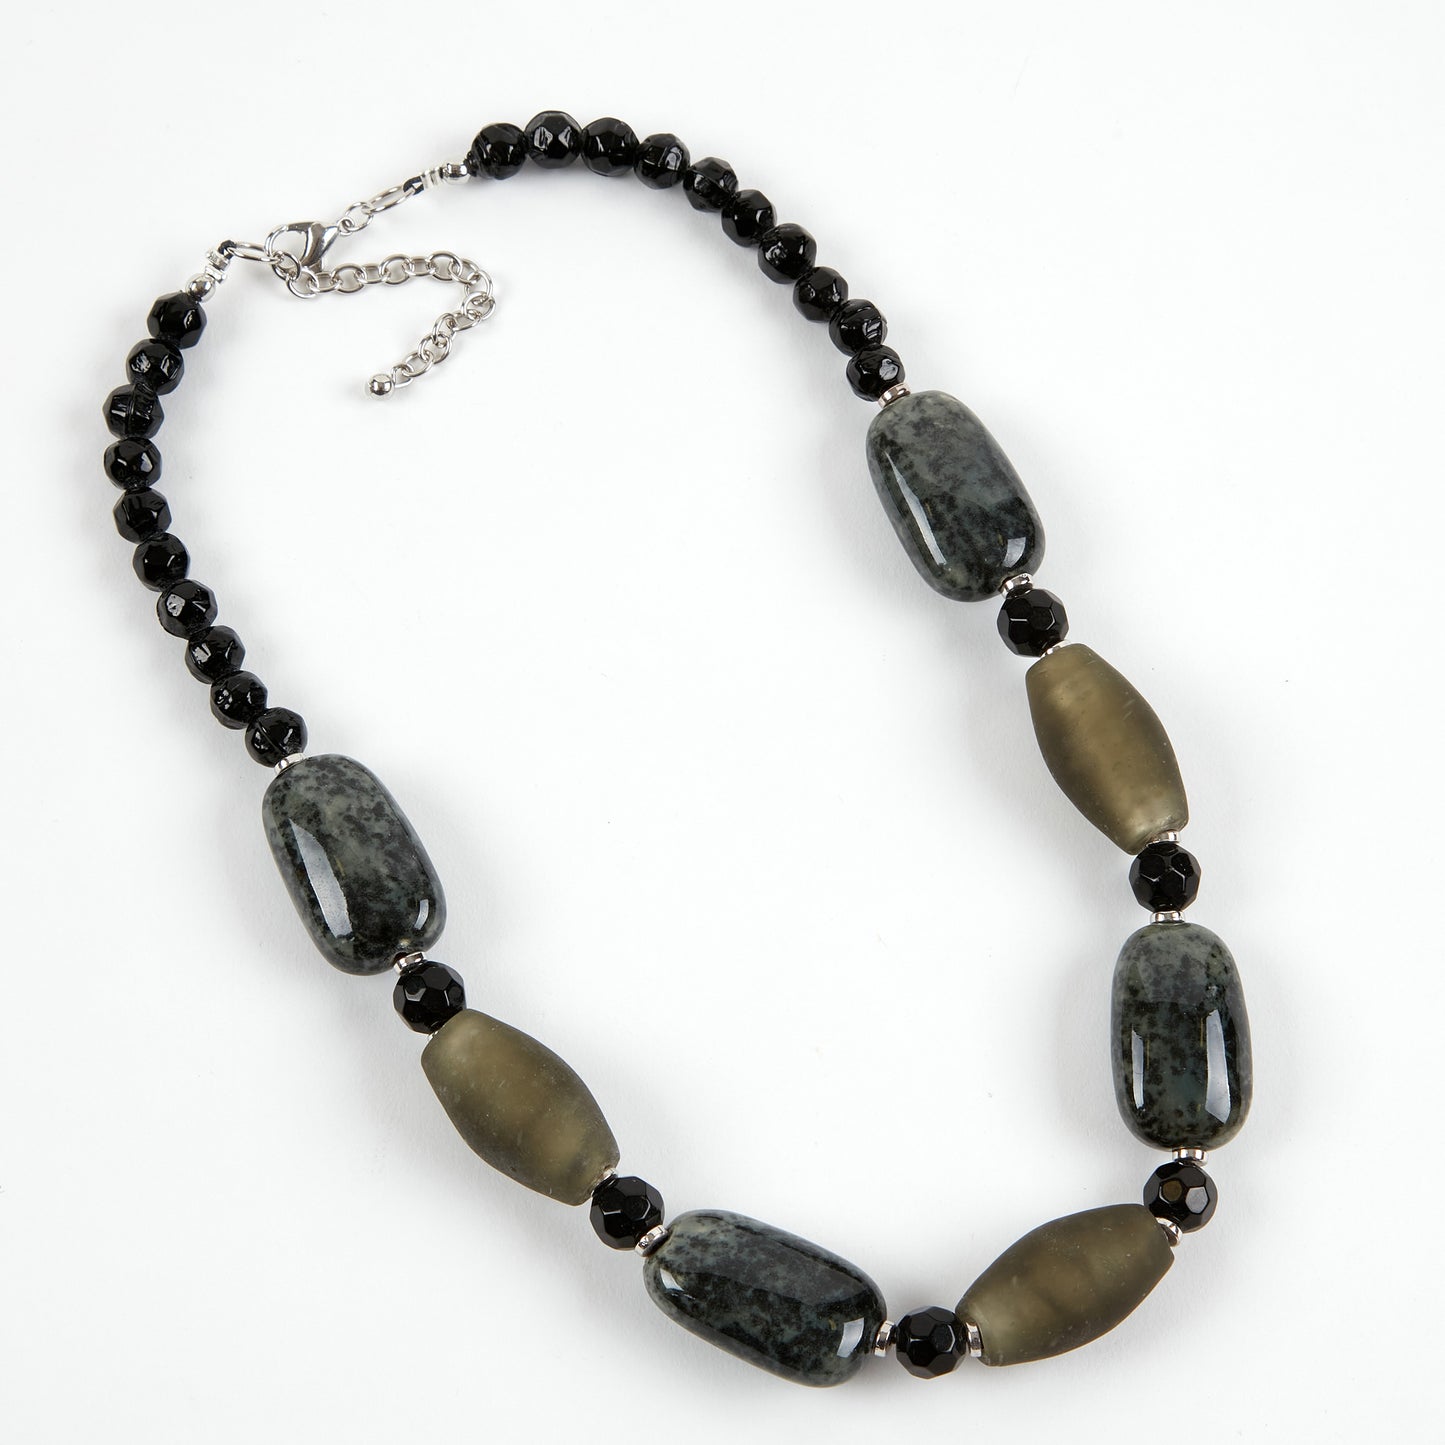 Dante Green and black necklace